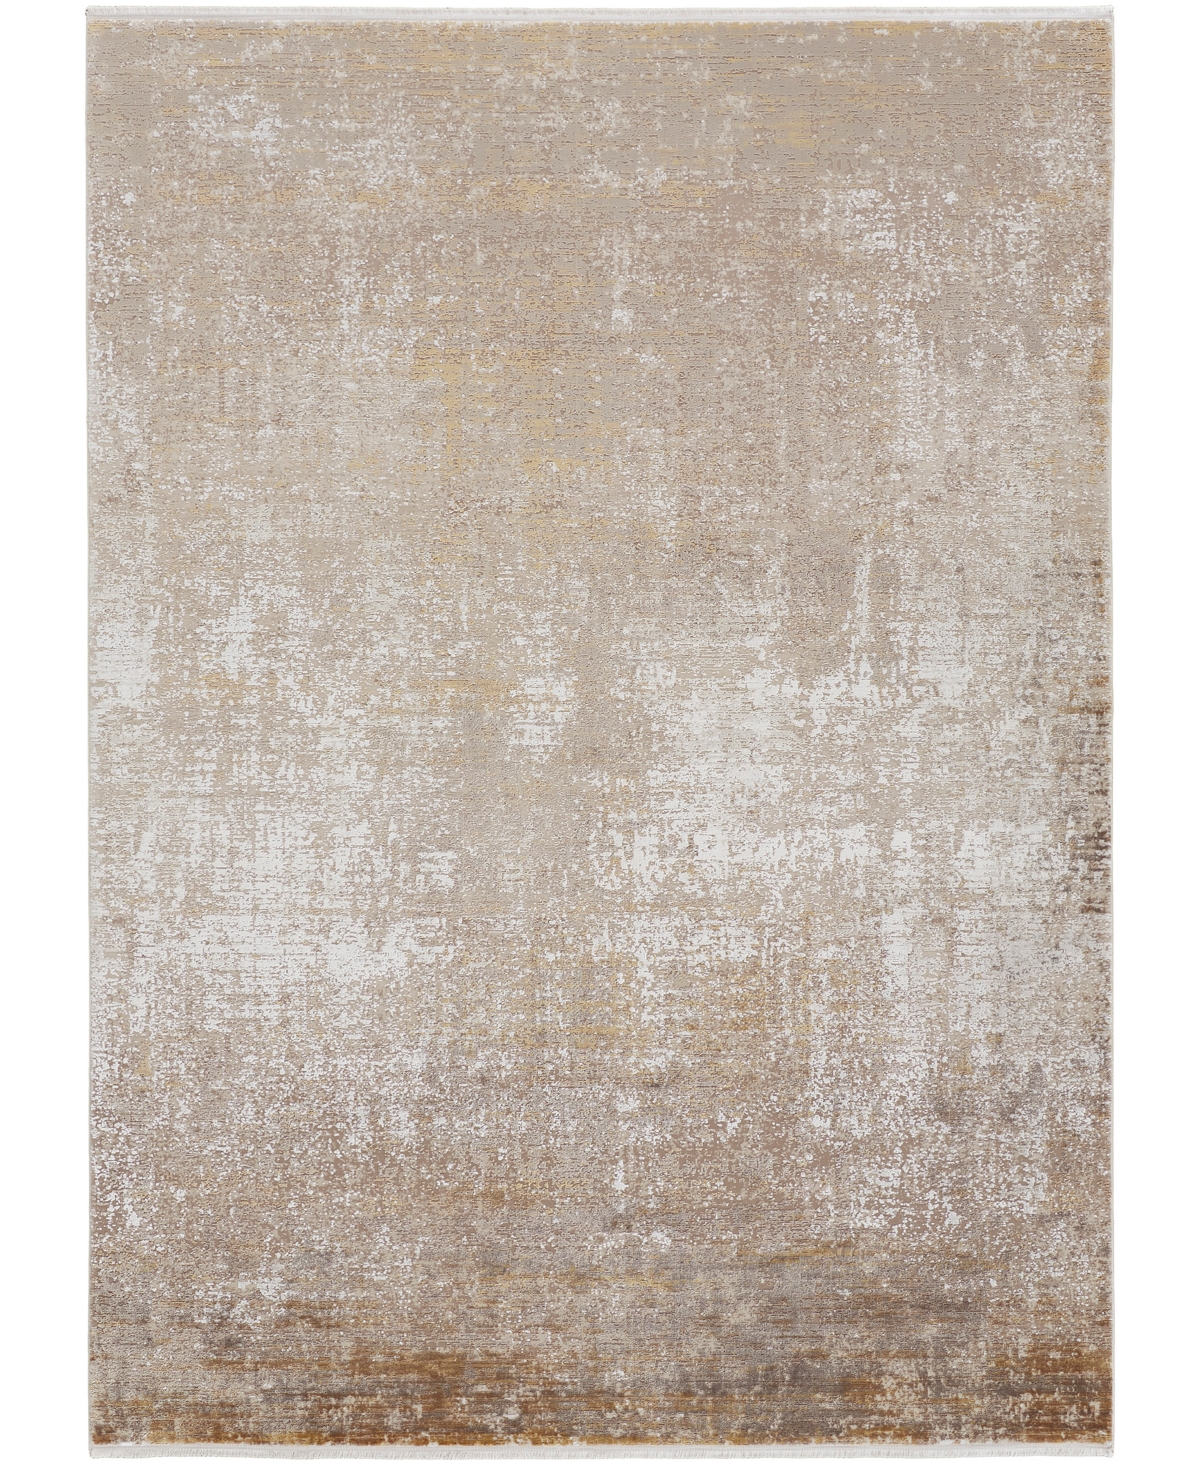 Feizy Assen ASE39FW 4'10in x 7'10in Area Rug - Taupe, Gold-Tone